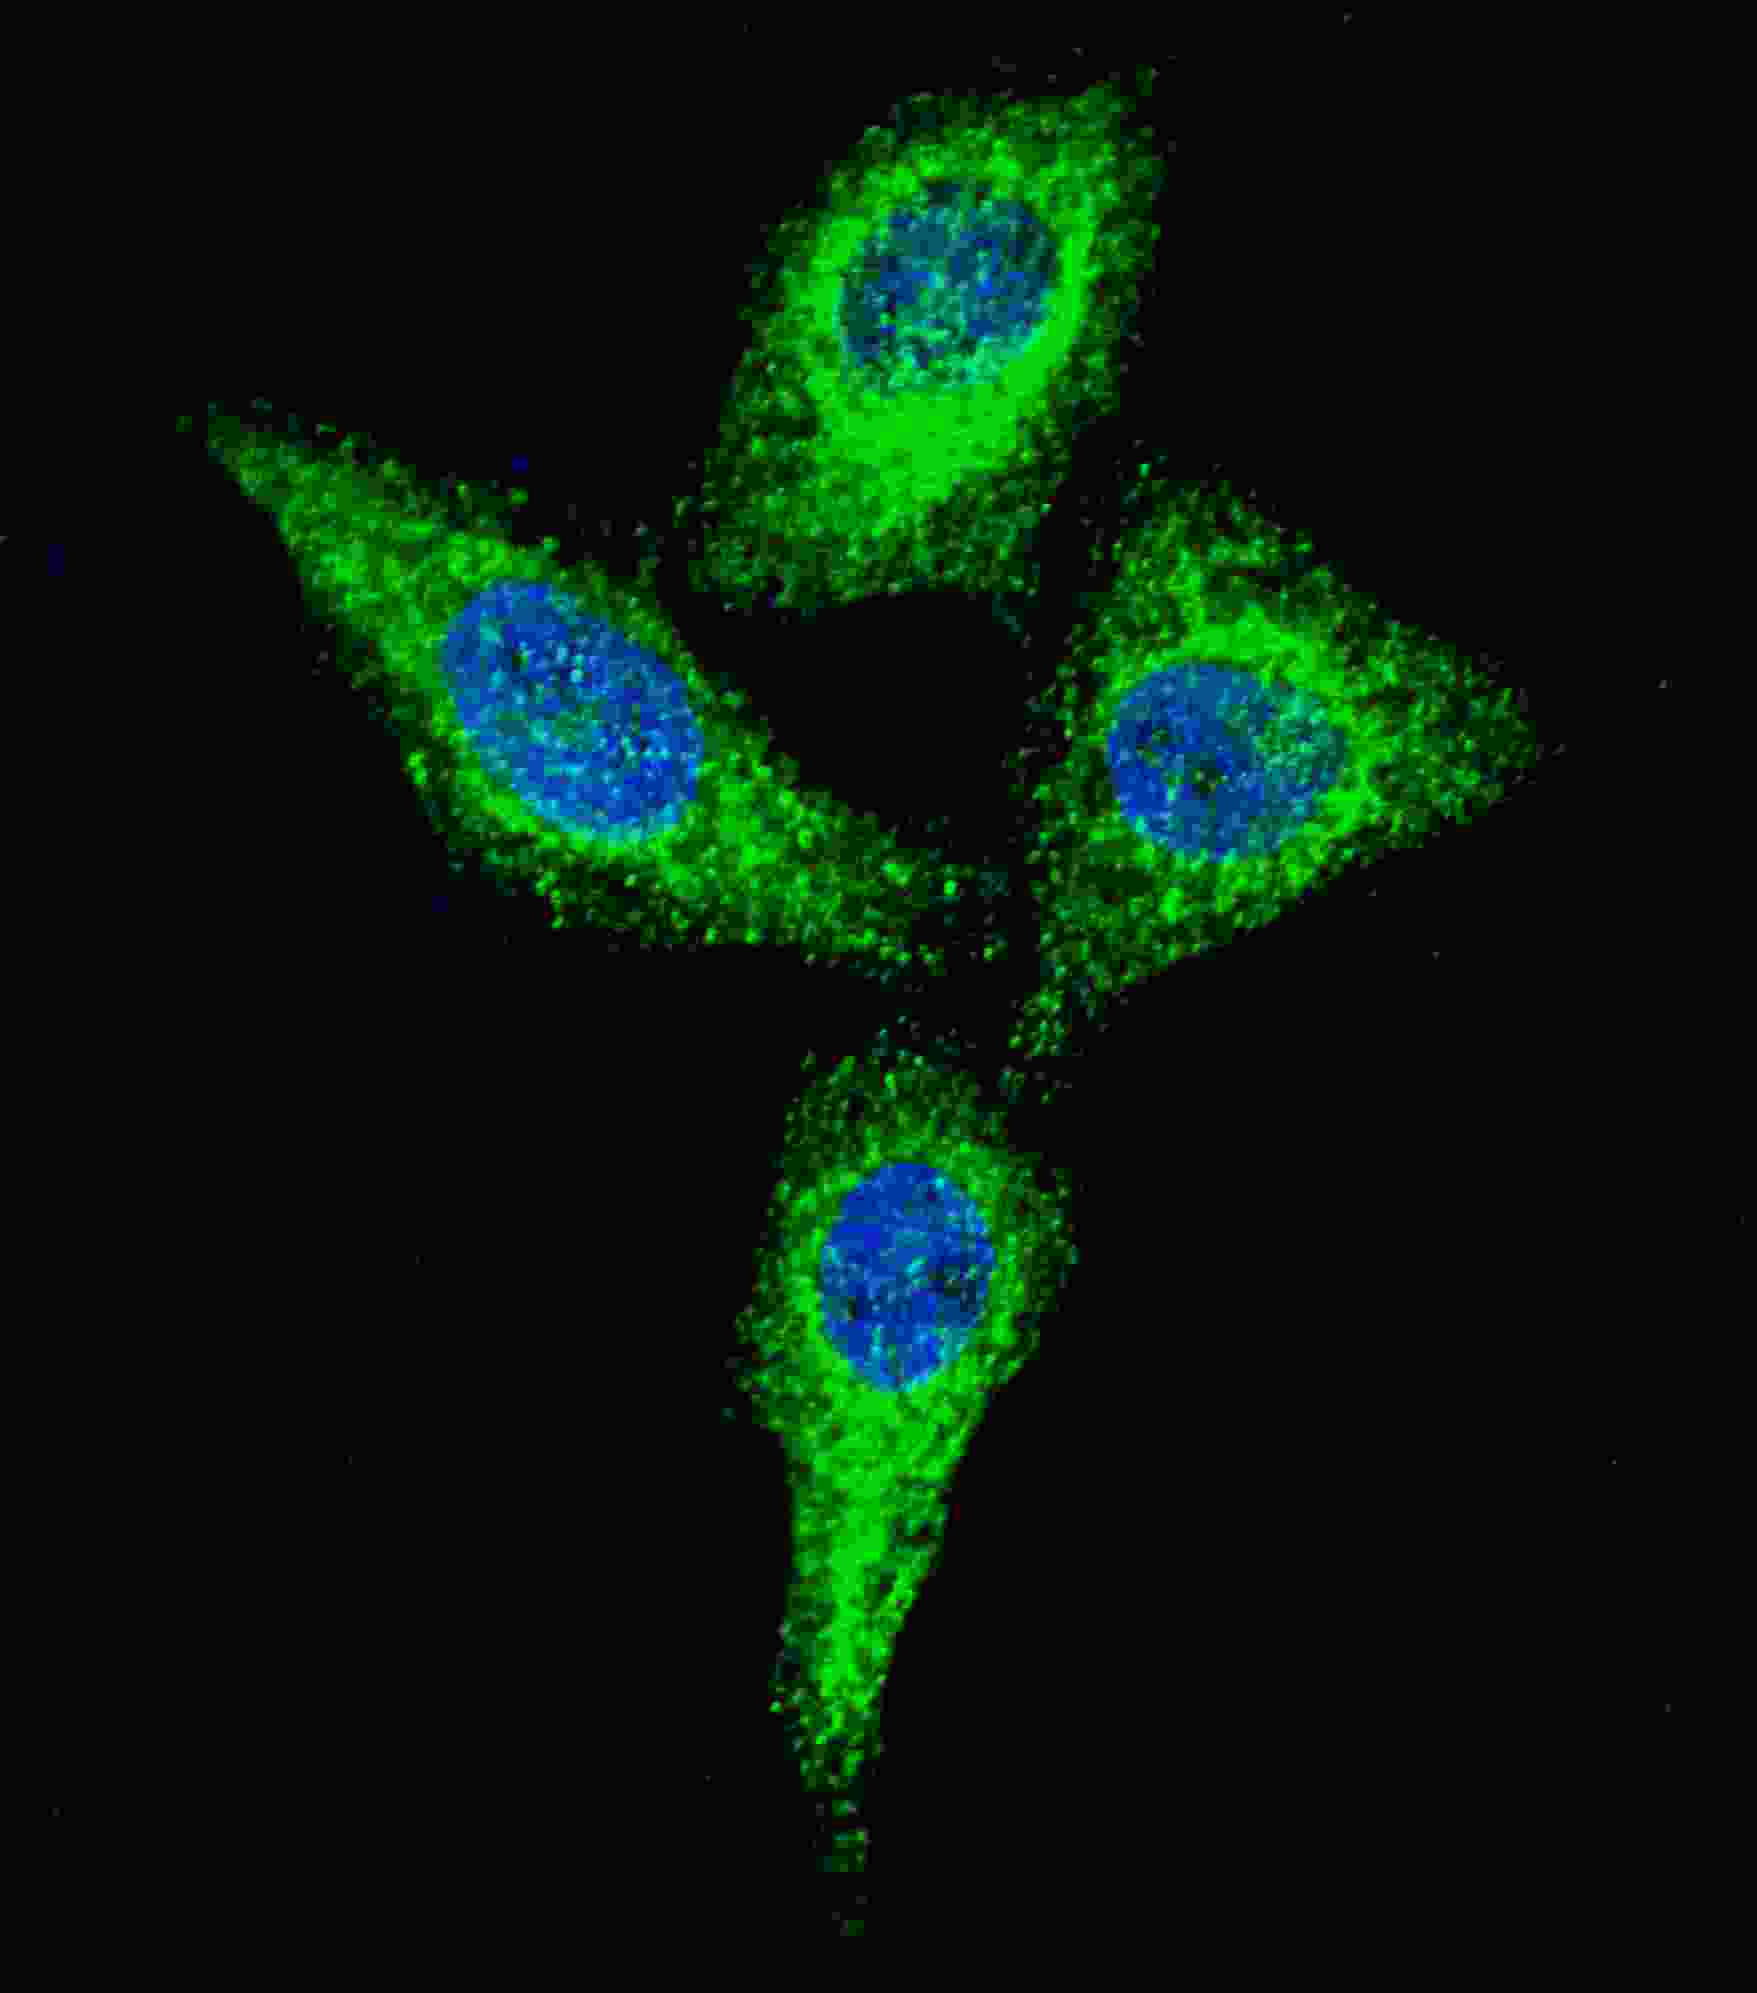 Fluorescent confocal image of HeLa cells stained with Alkaline Phosphatase (ALPI) (Center) antibody. HeLa cells were fixed with 4% PFA (20 min), permeabilized with Triton X-100 (0.2%, 30 min). Cells were then incubated with AP1480c Alkaline Phosphatase (ALPI) (Center) primary antibody (1:100, 2 h at room temperature). For secondary antibody, Alexa Fluor� 488 conjugated donkey anti-rabbit antibody (green) was used (1:1000, 1h). Nuclei were counterstained with Hoechst 33342 (blue) (10 ?g/ml, 5 min). Alkaline Phosphatase (ALPI) immunoreactivity is localized to the cytoplasm of HeLa cells.